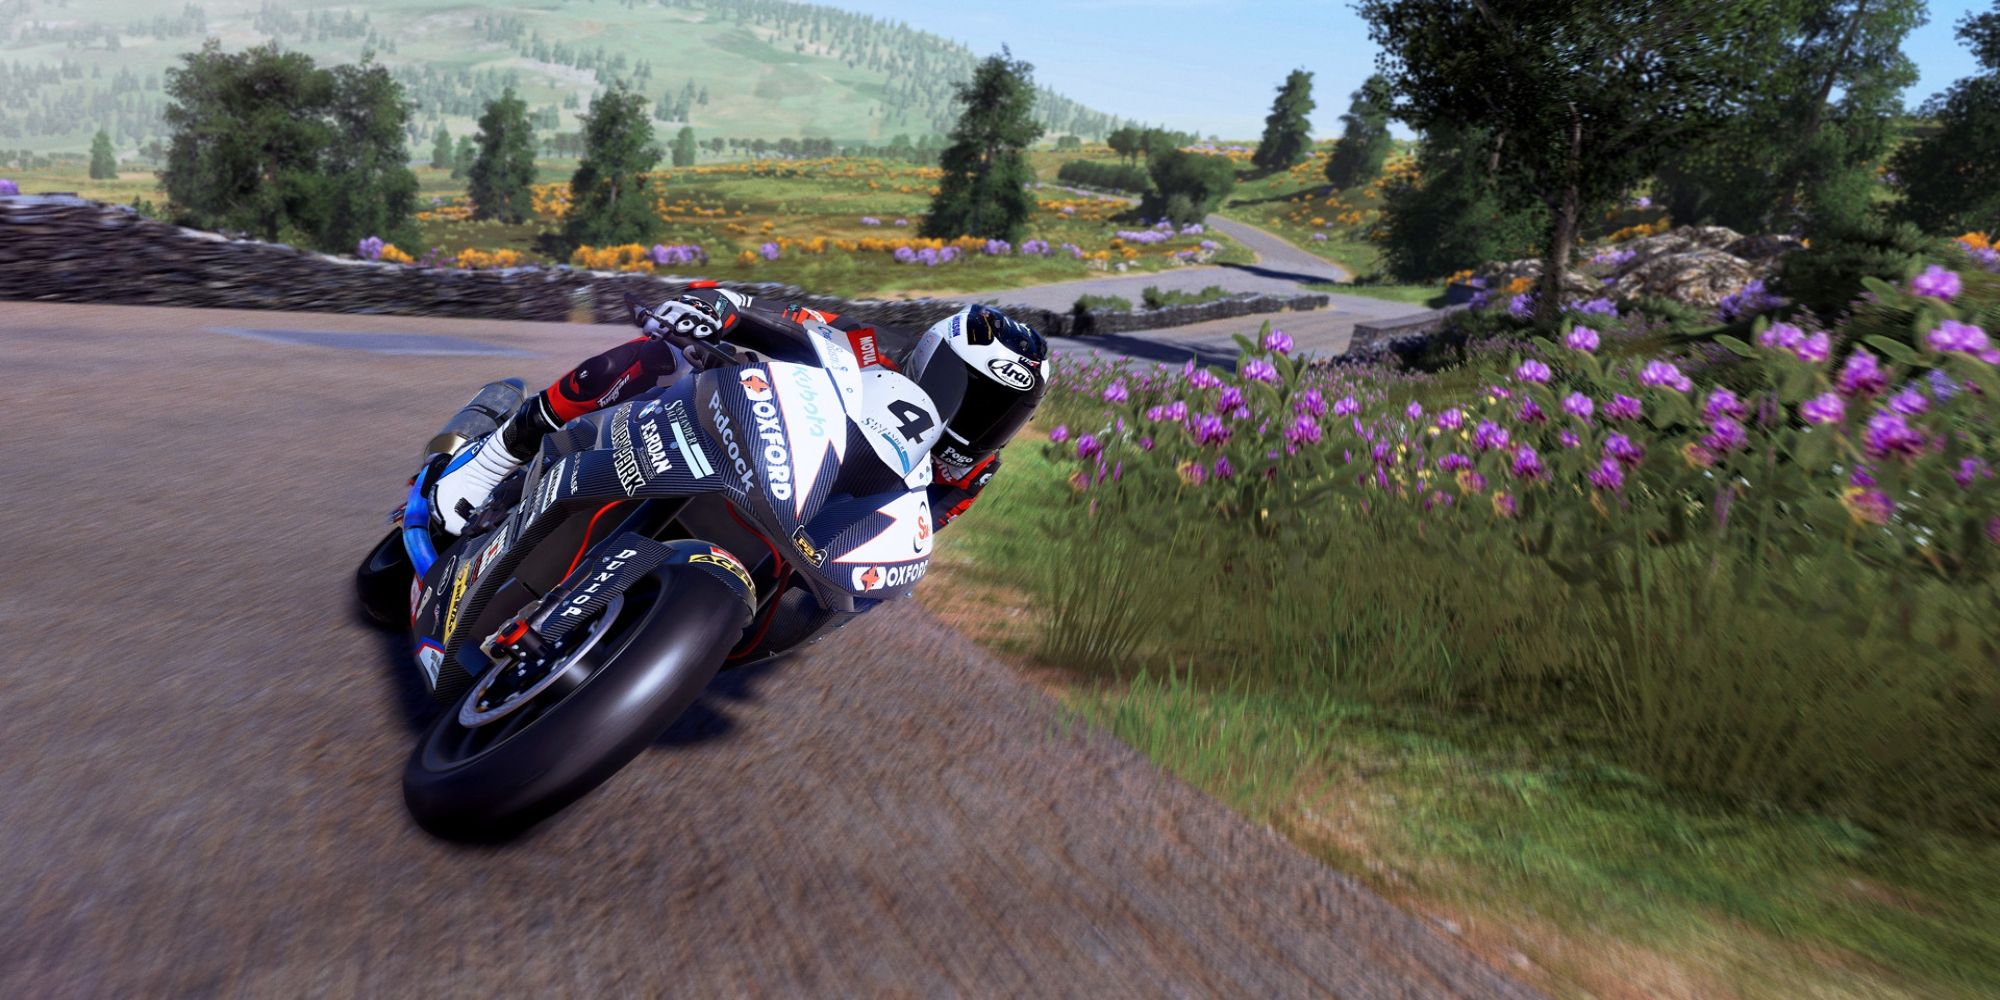 Player rides close to a patch of beautiful purple flowers